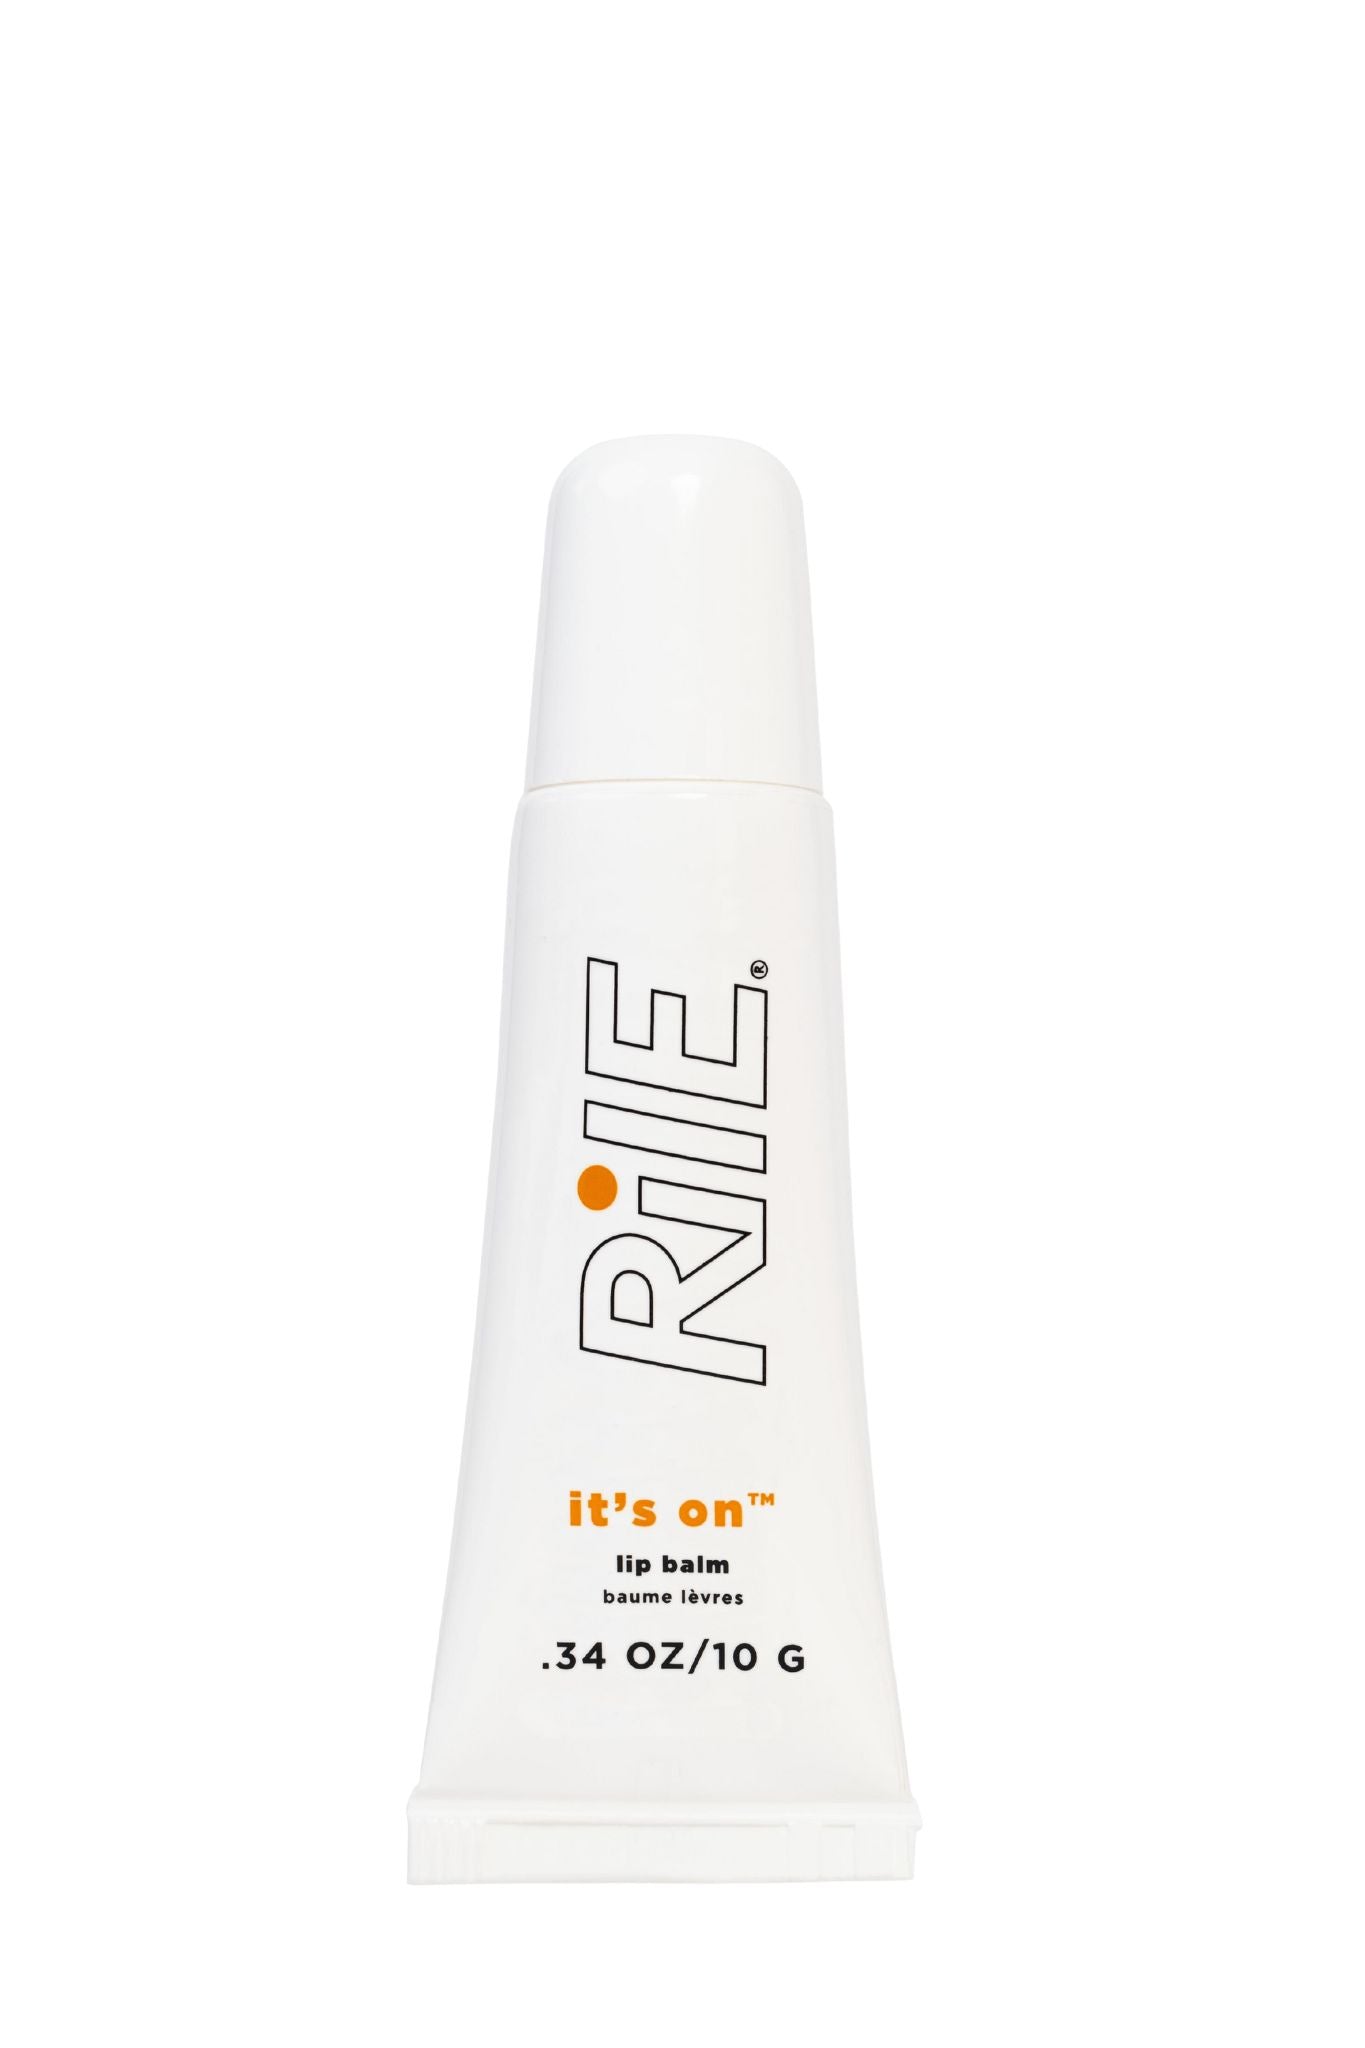 A lip balm for teens or tweens in a white tube with the Rile logo and lip balm written on the tube.